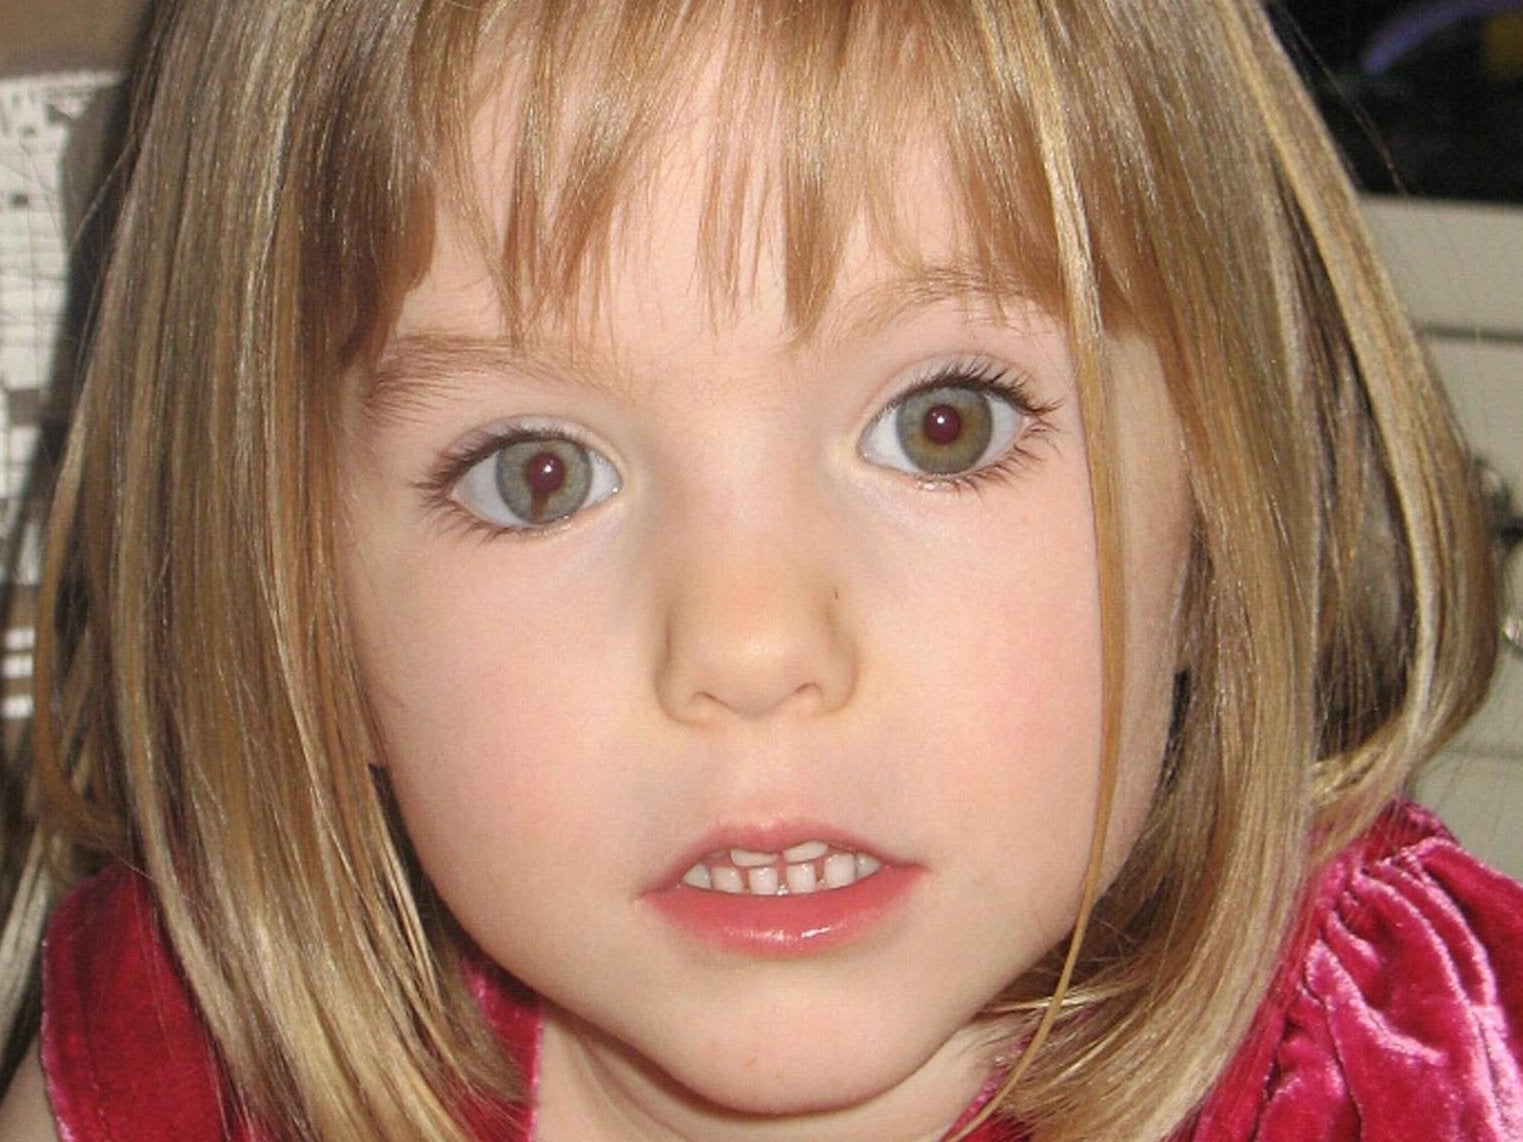 What happened to Madeleine McCann? Five possible scenarios ...